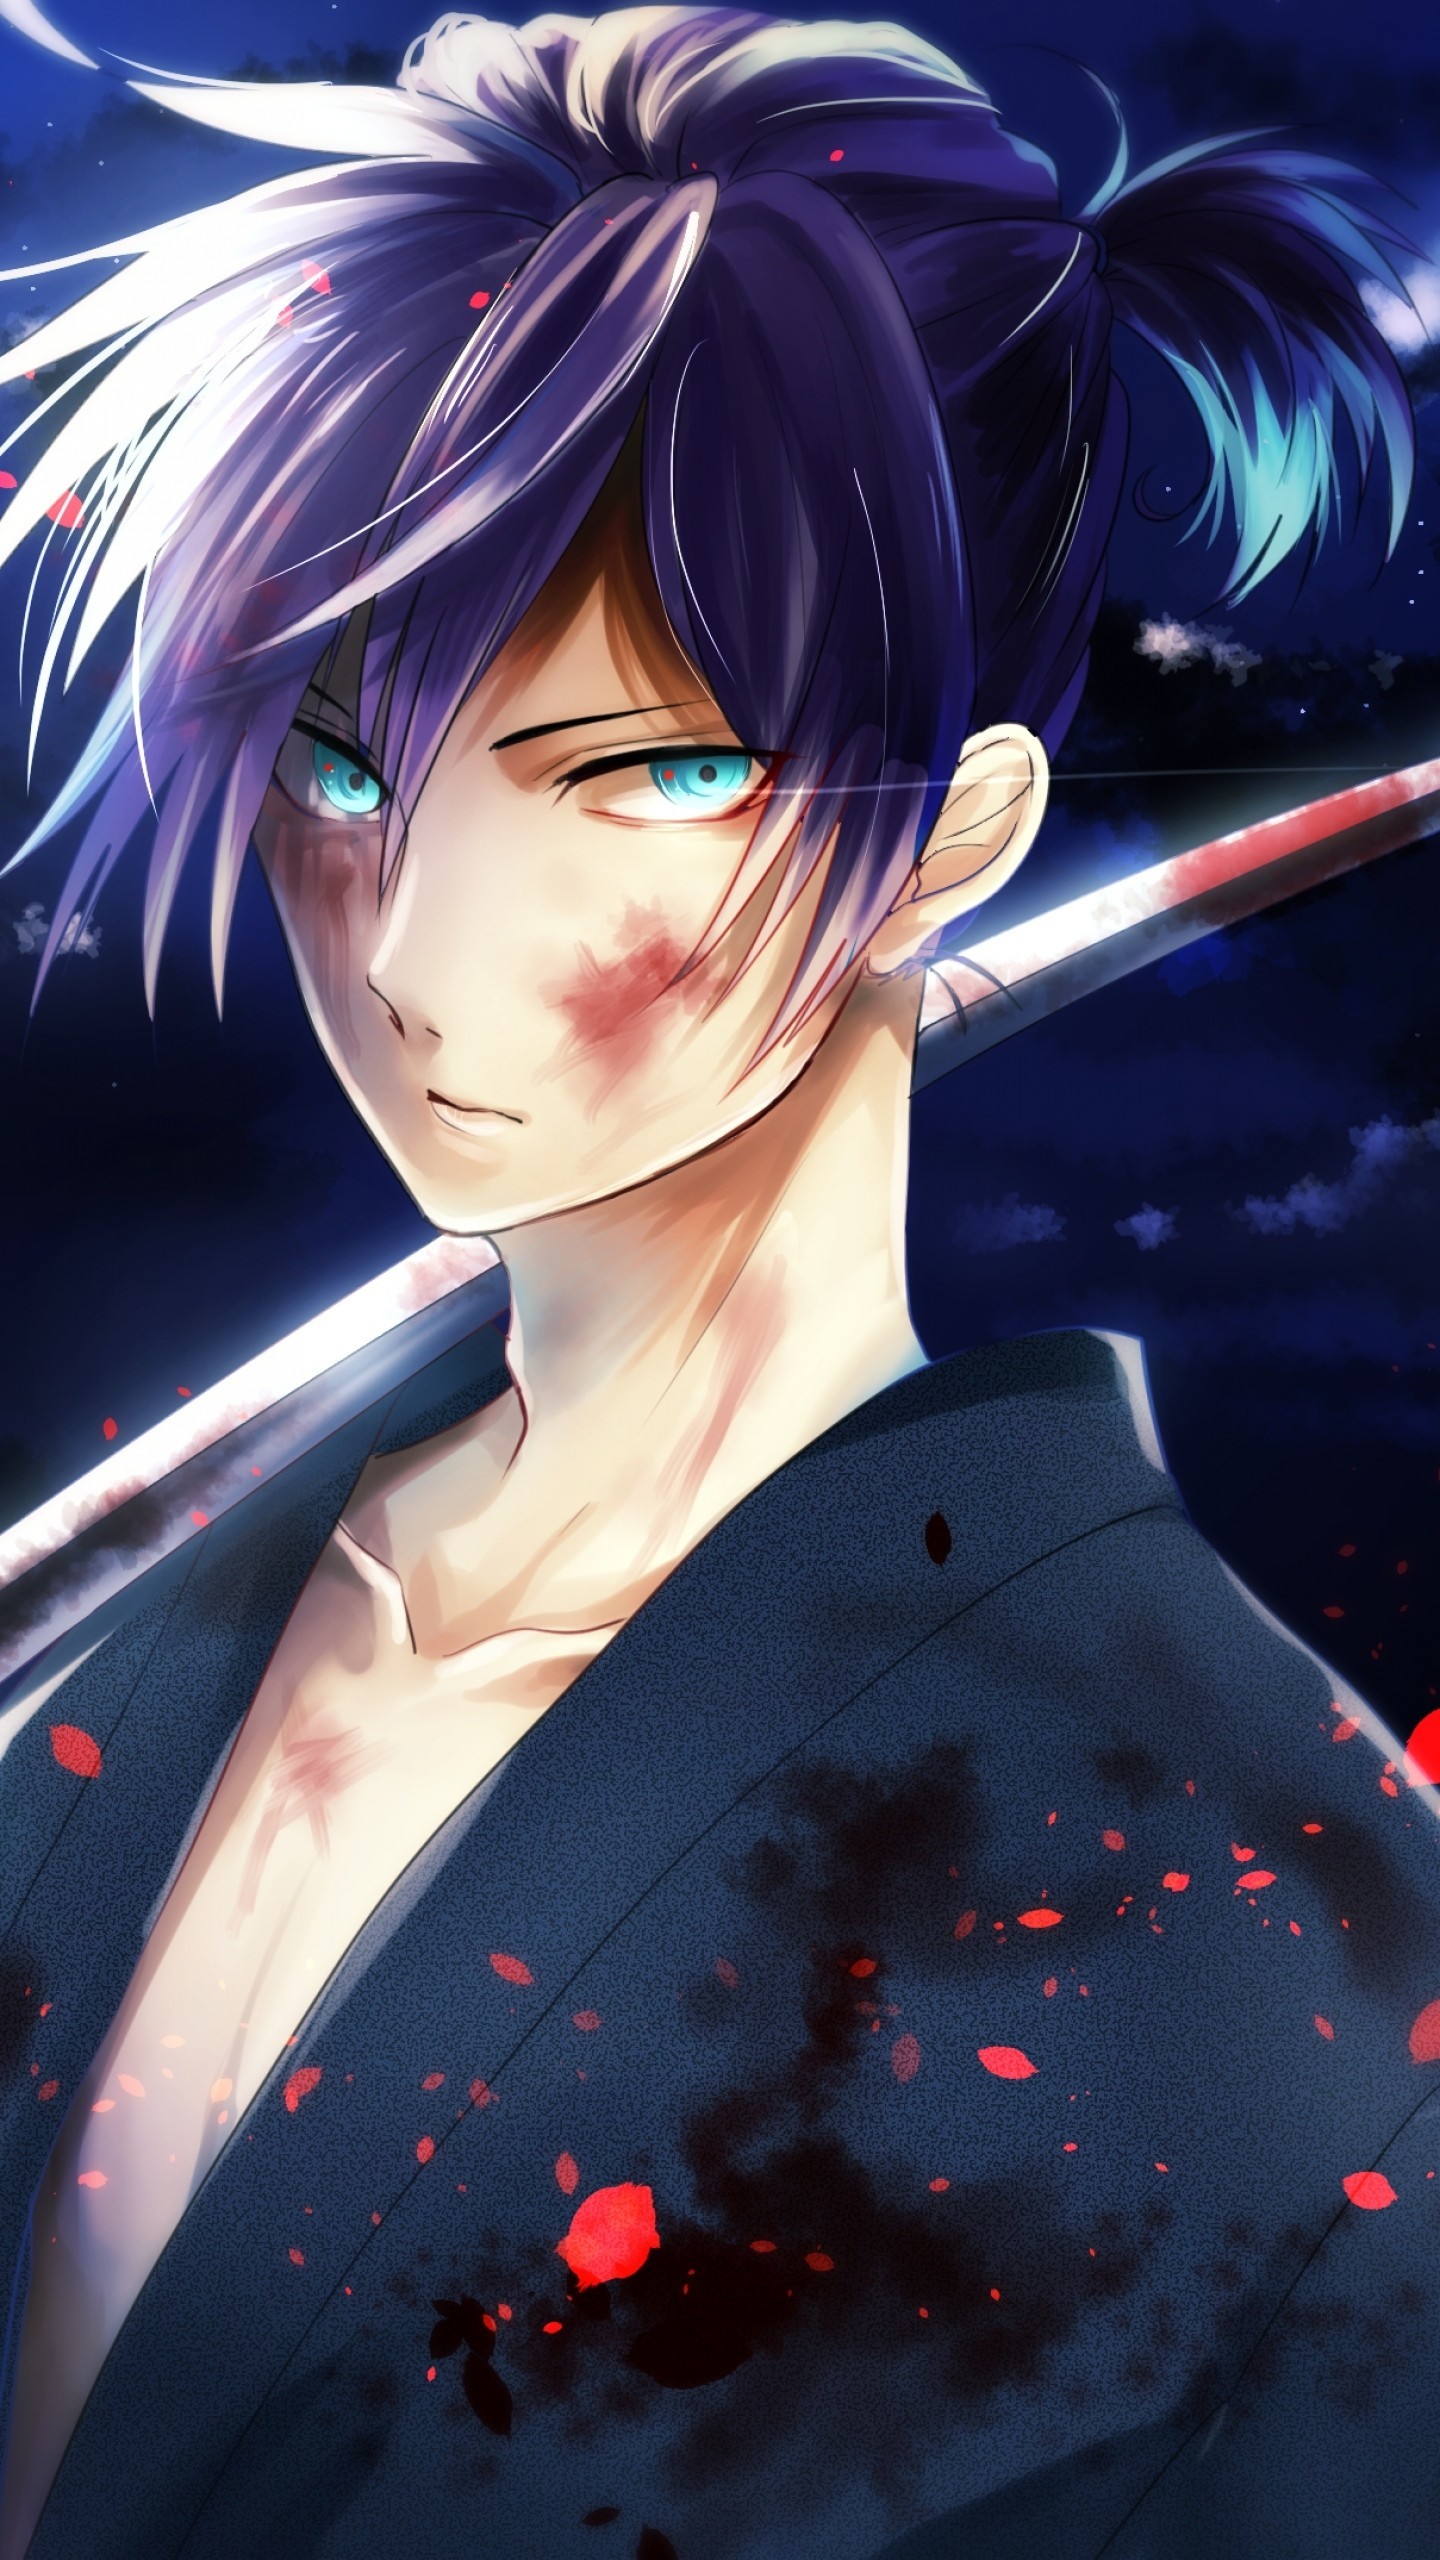 1440x2560 1080x1920 Wallpaper: 100% Quality HD Noragami IPhone Wallpapers, by Merlin  Forgione